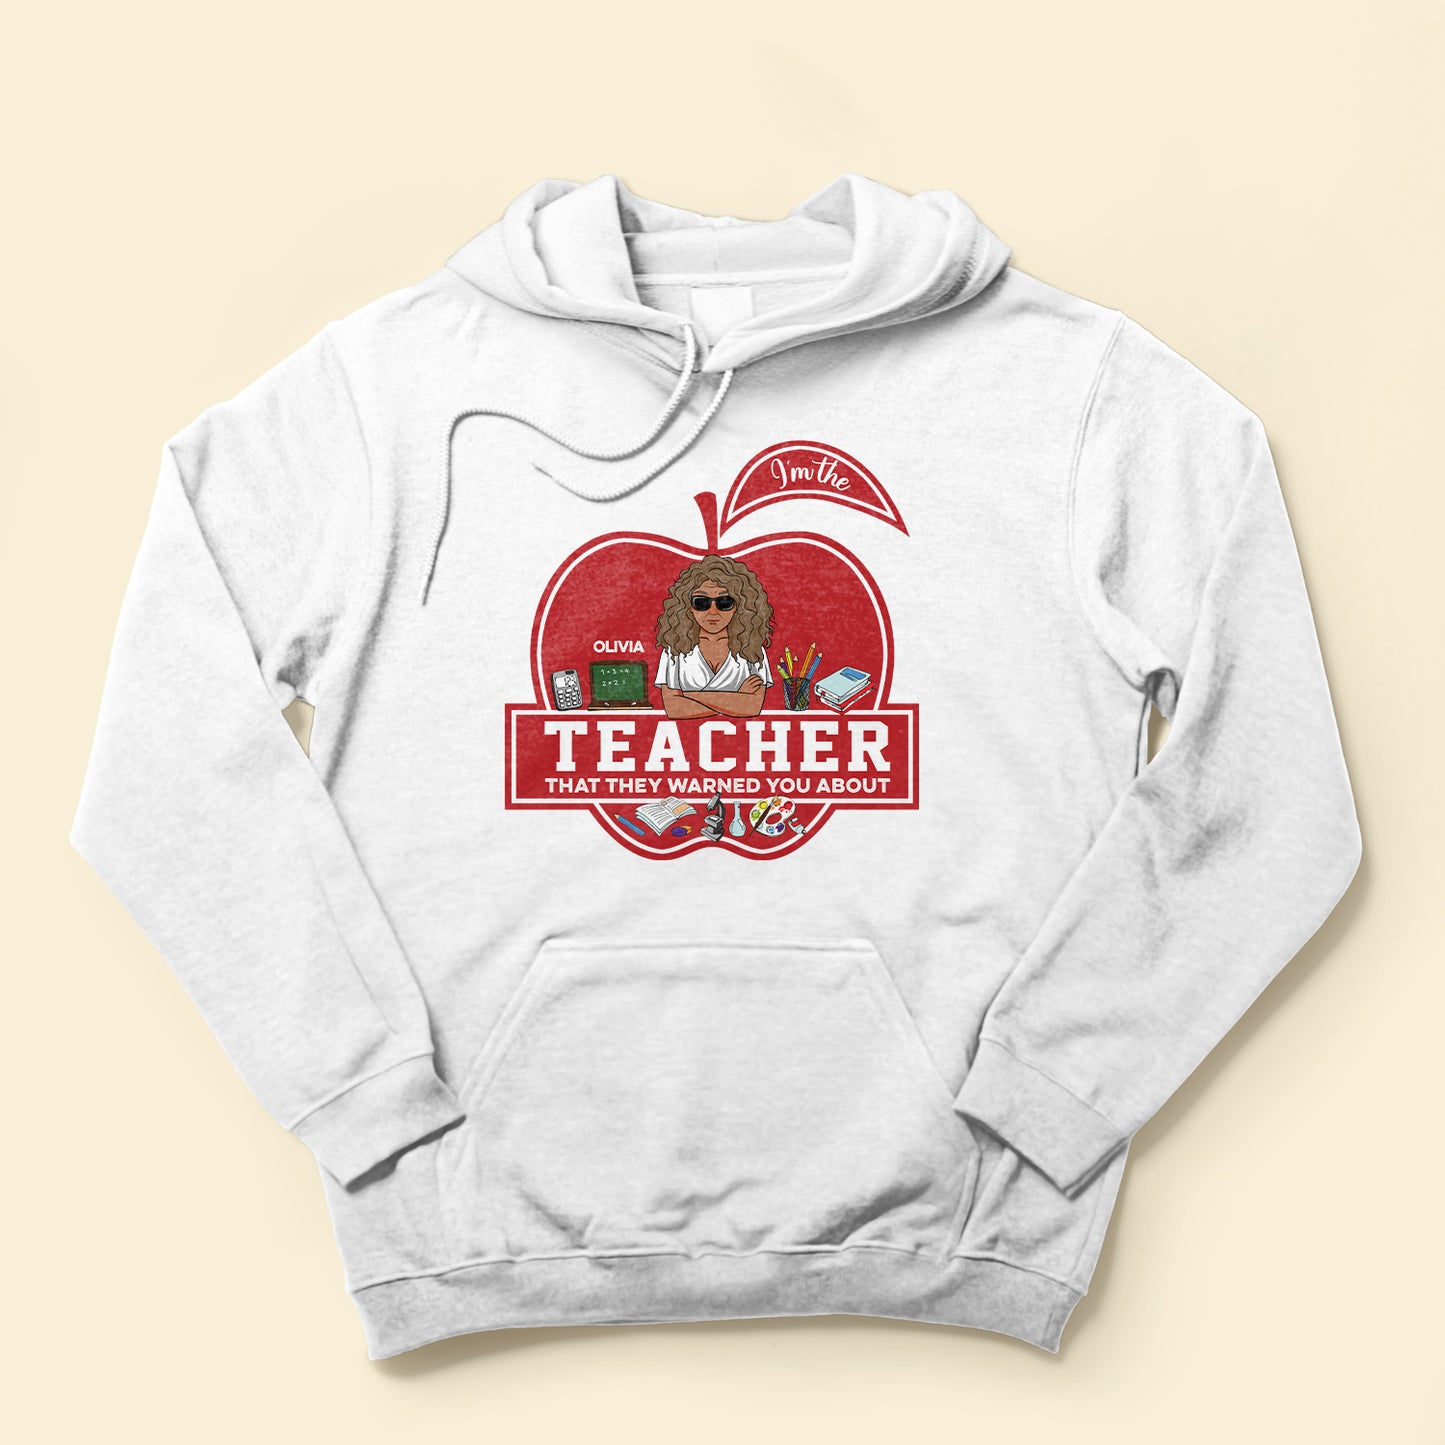 I'm The Teacher That They Warned You About - Personalized Shirt - Back To School, First Day Of School, Funny Gift For Teachers, Teacher Assistants